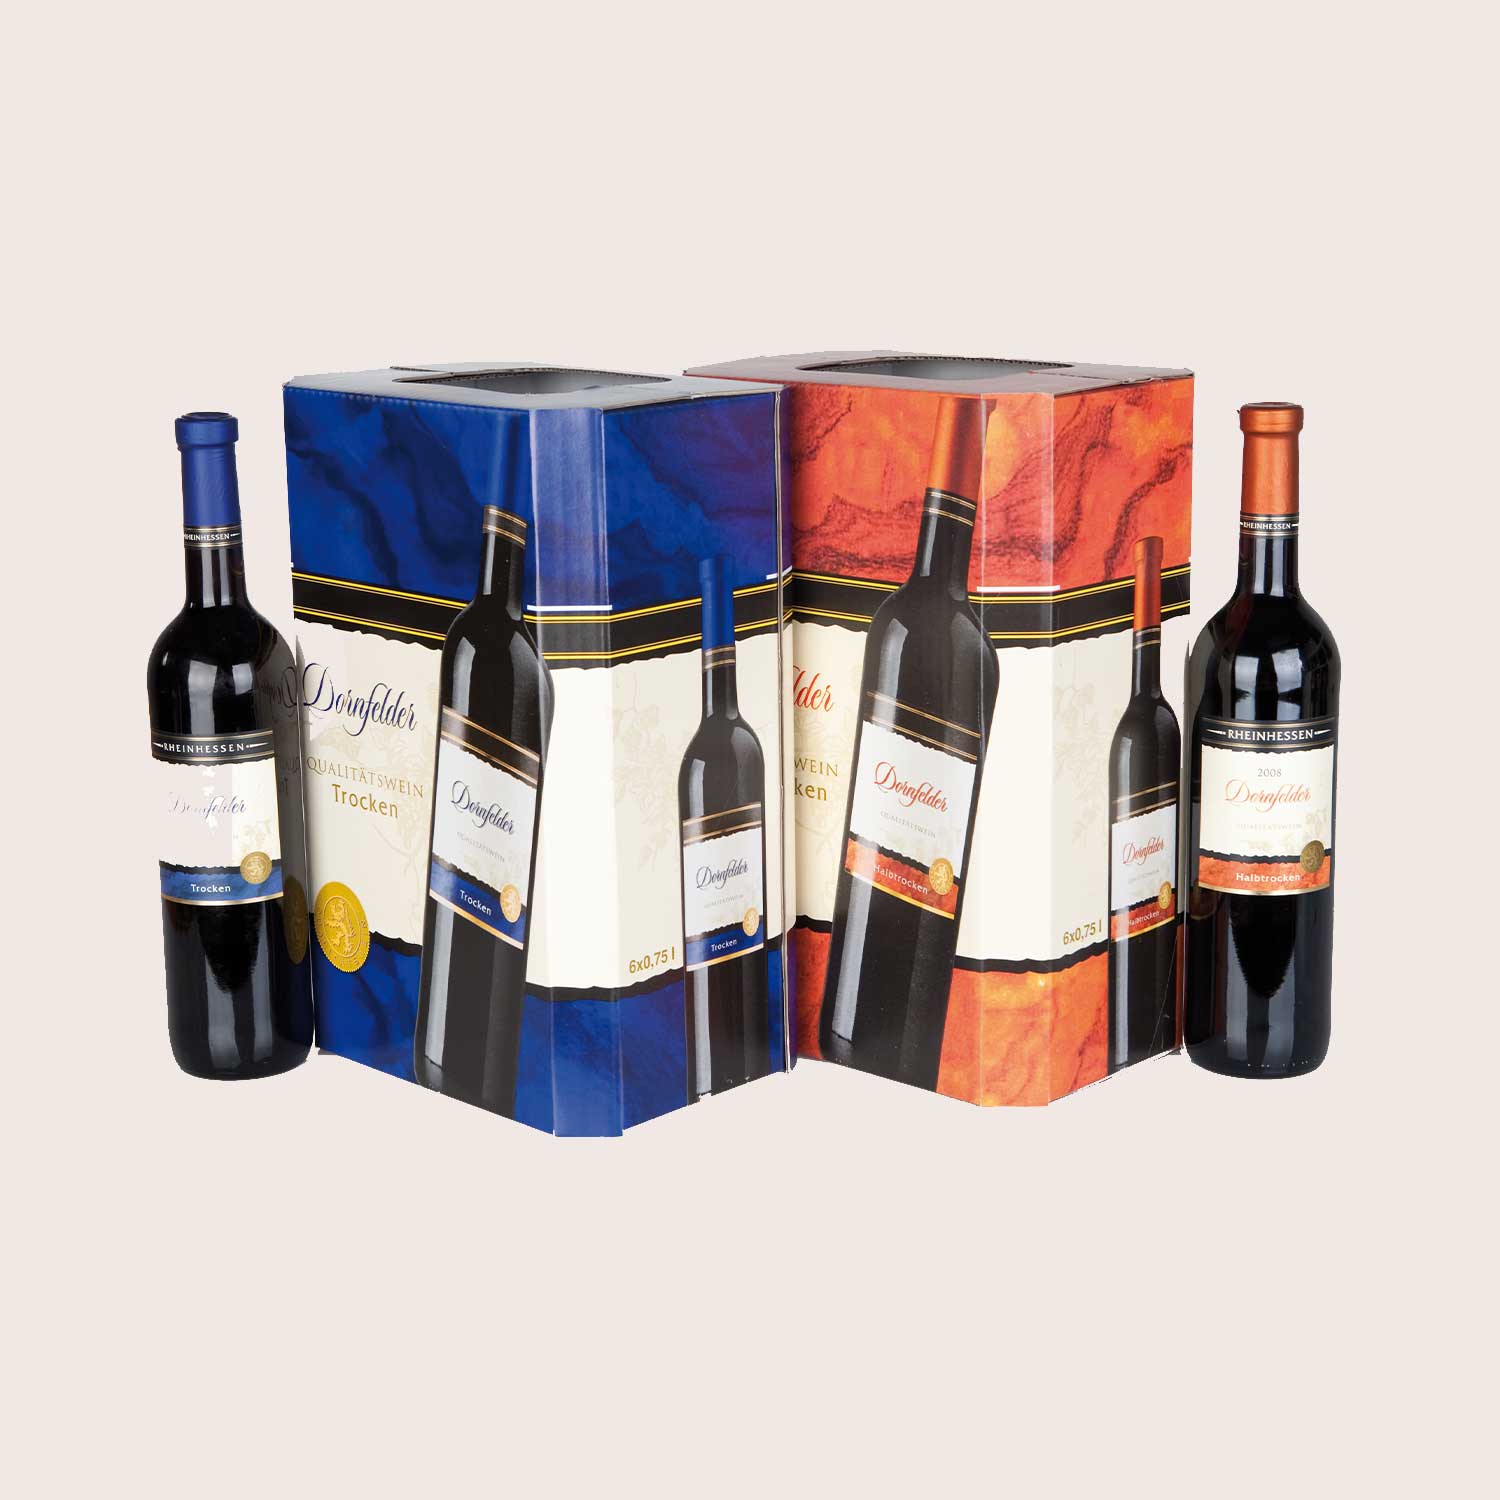 Wine boxes made from corrugated cardboard